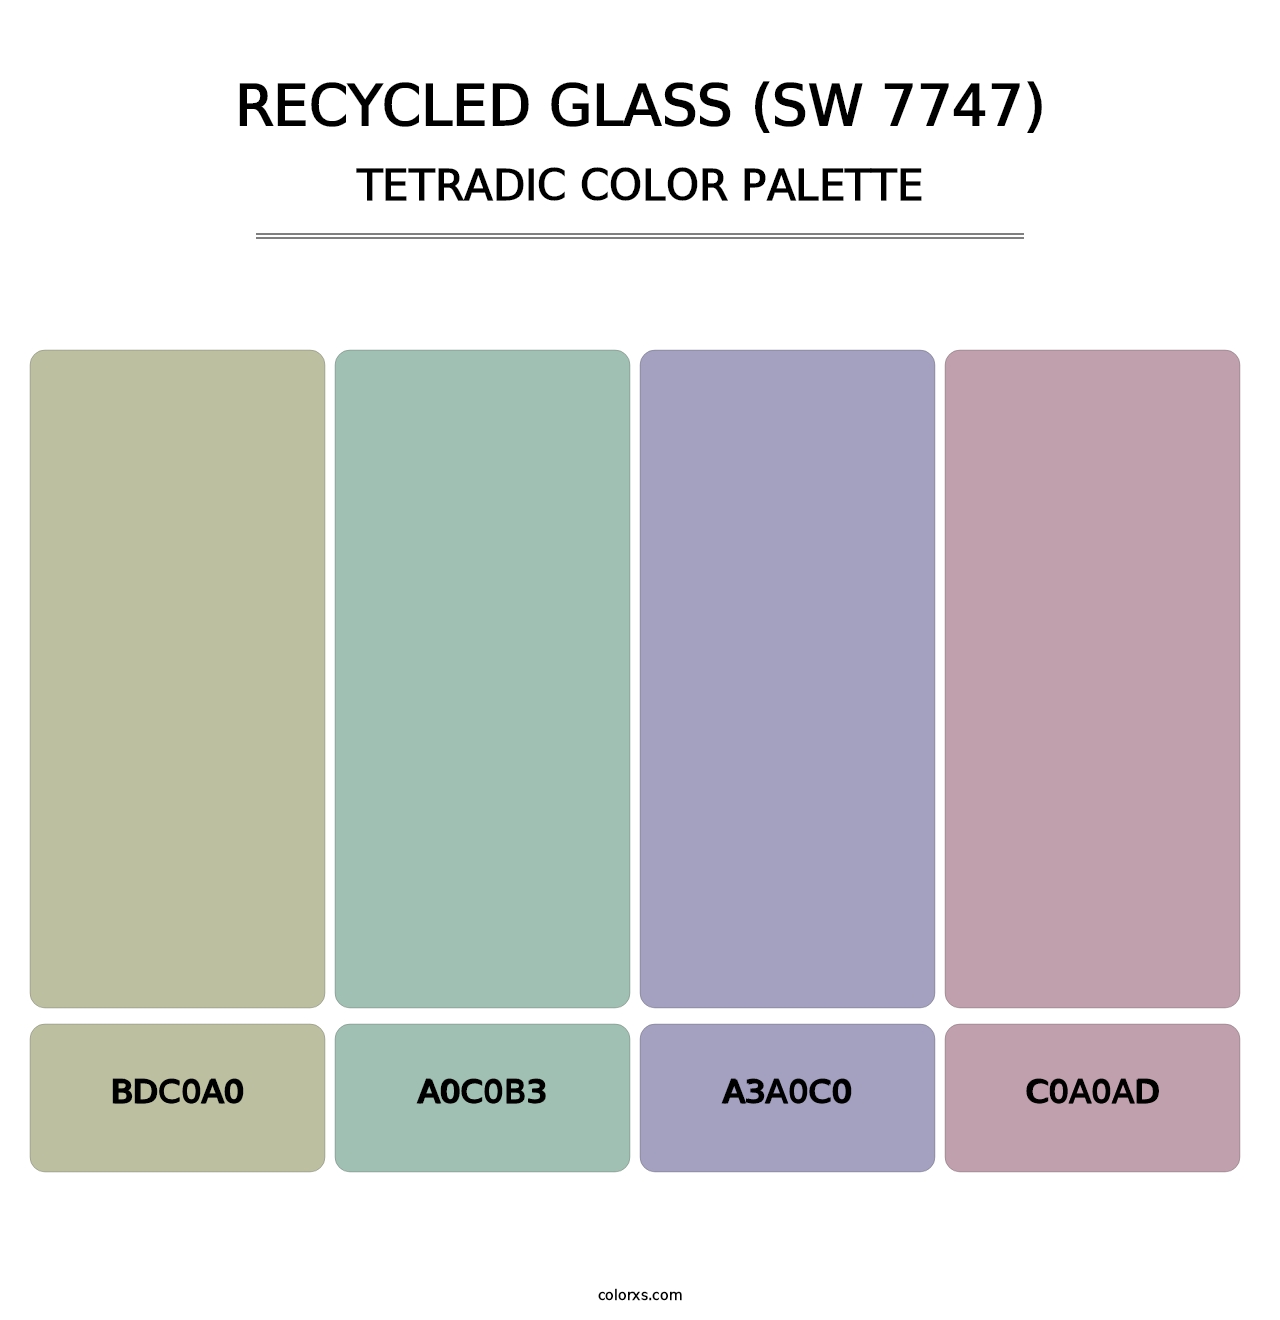 Recycled Glass (SW 7747) - Tetradic Color Palette